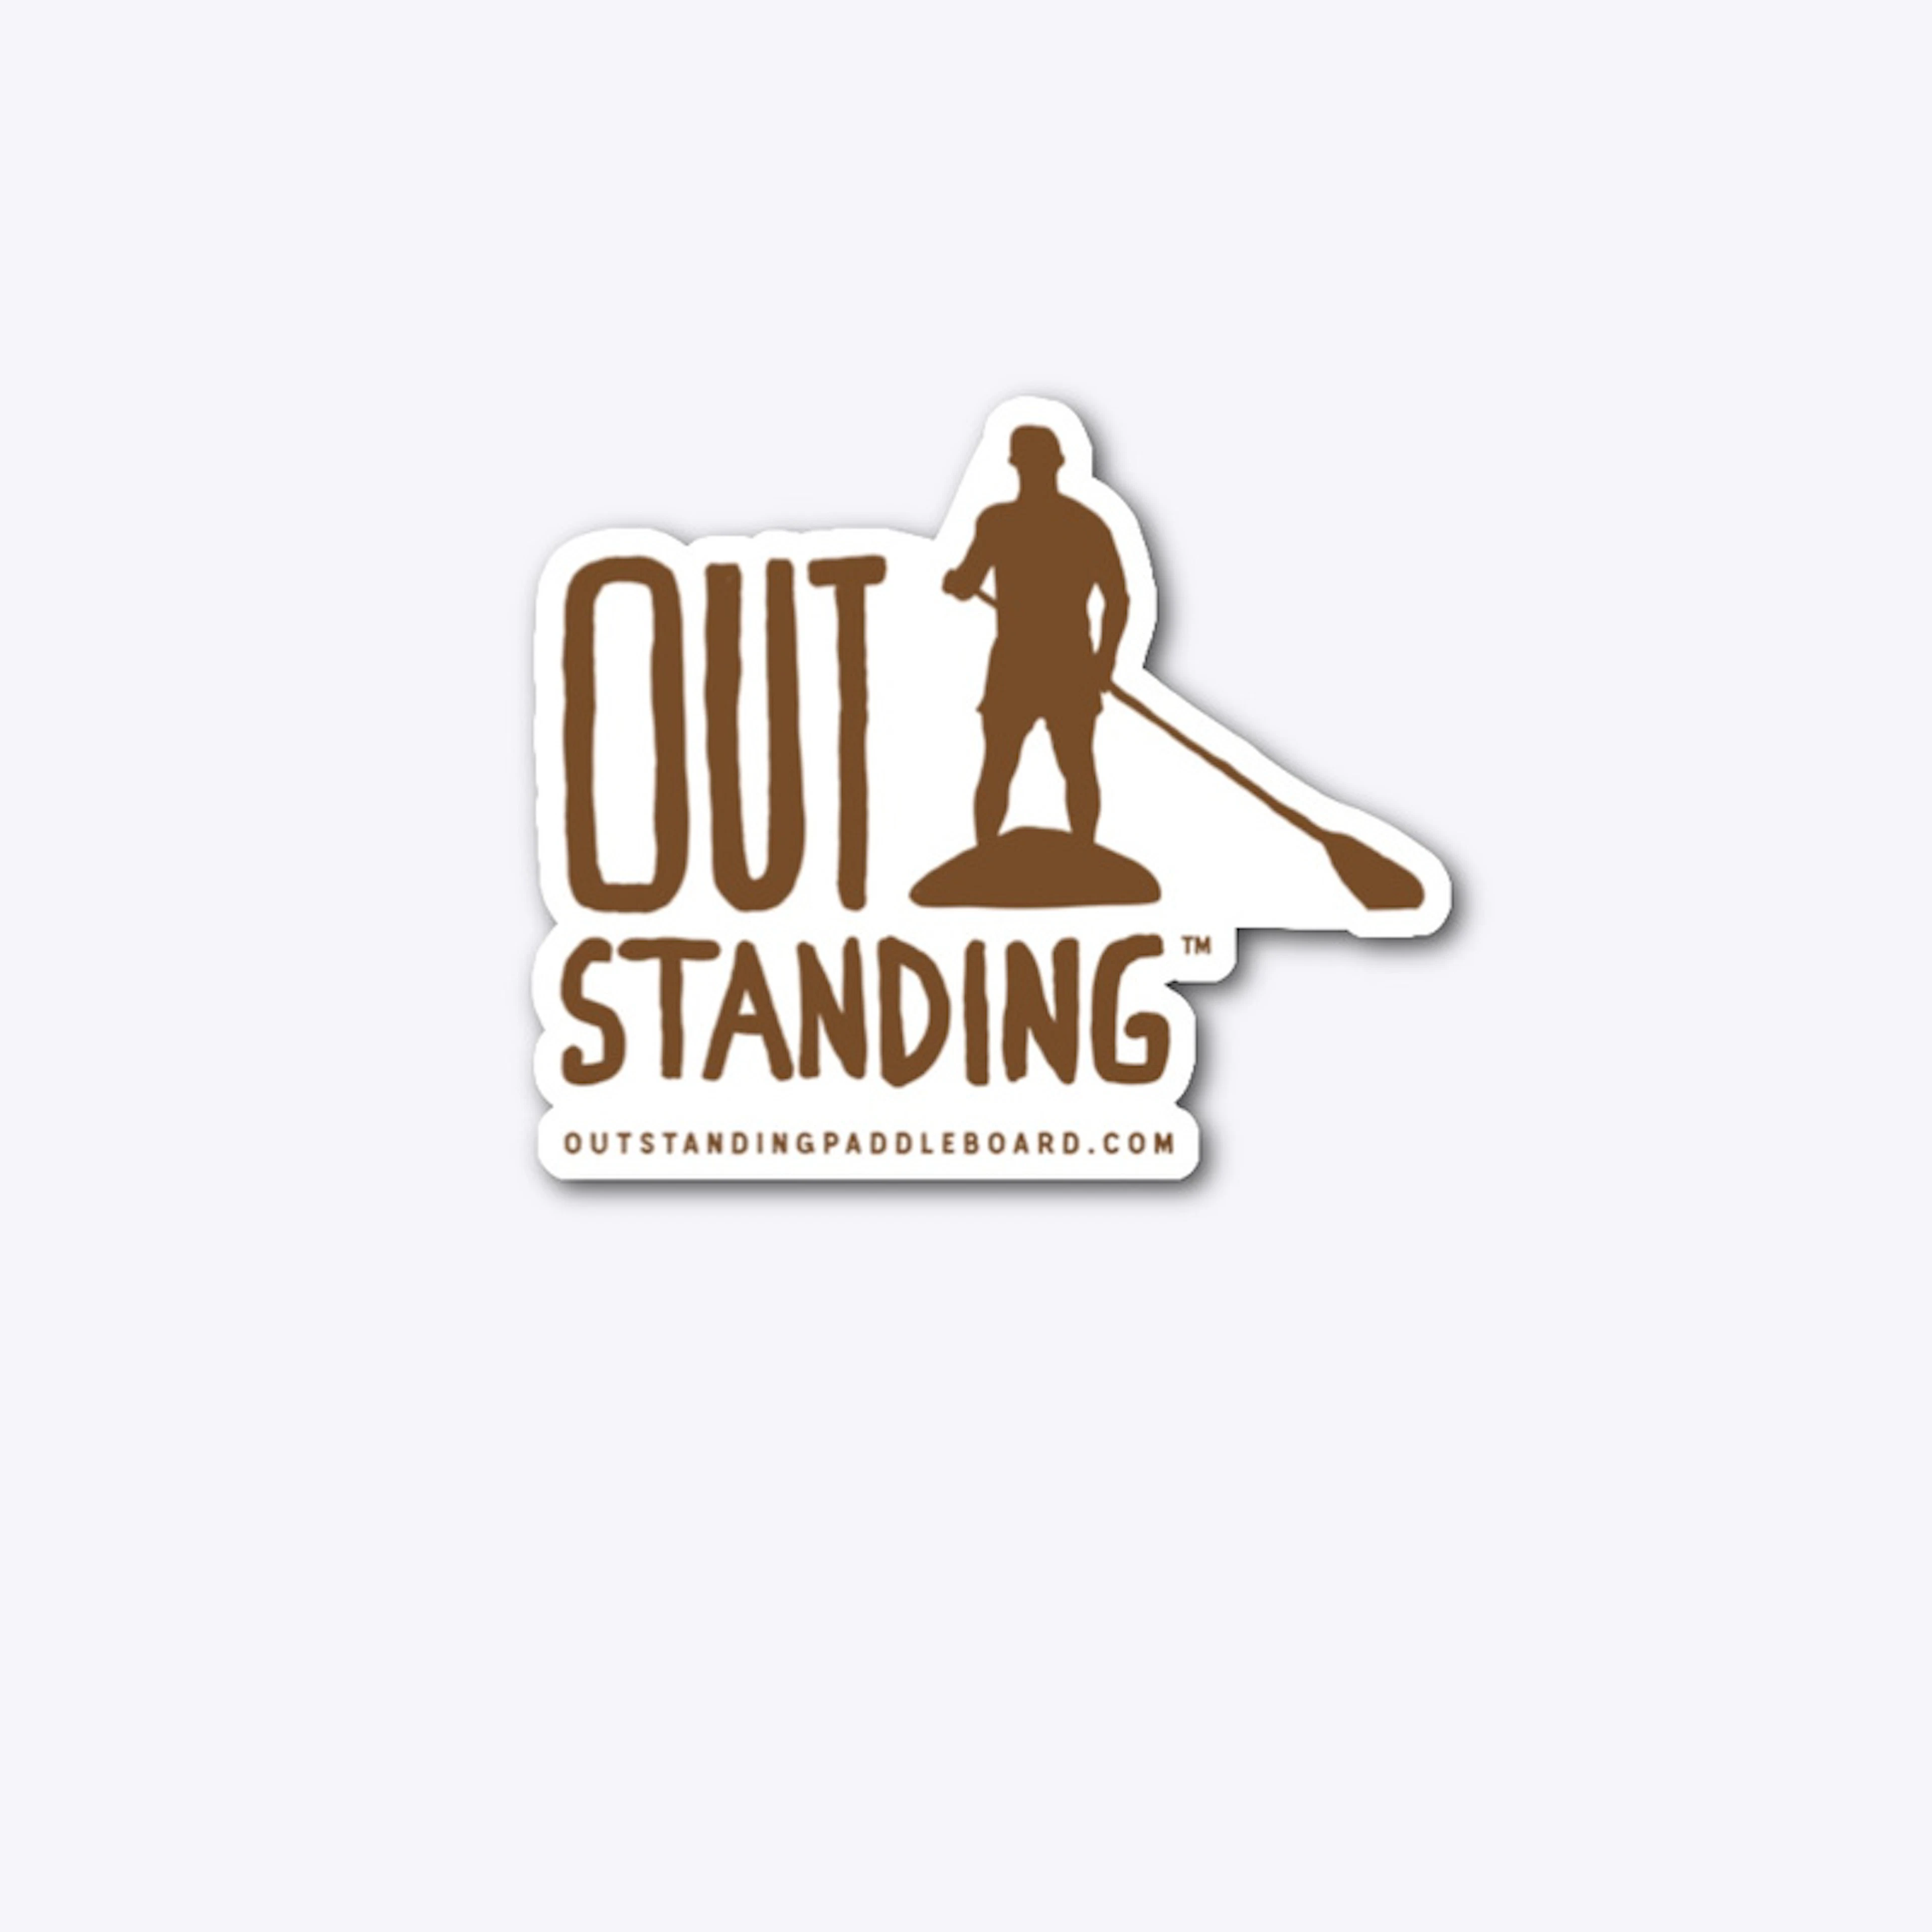 Out Standing™ Mountains